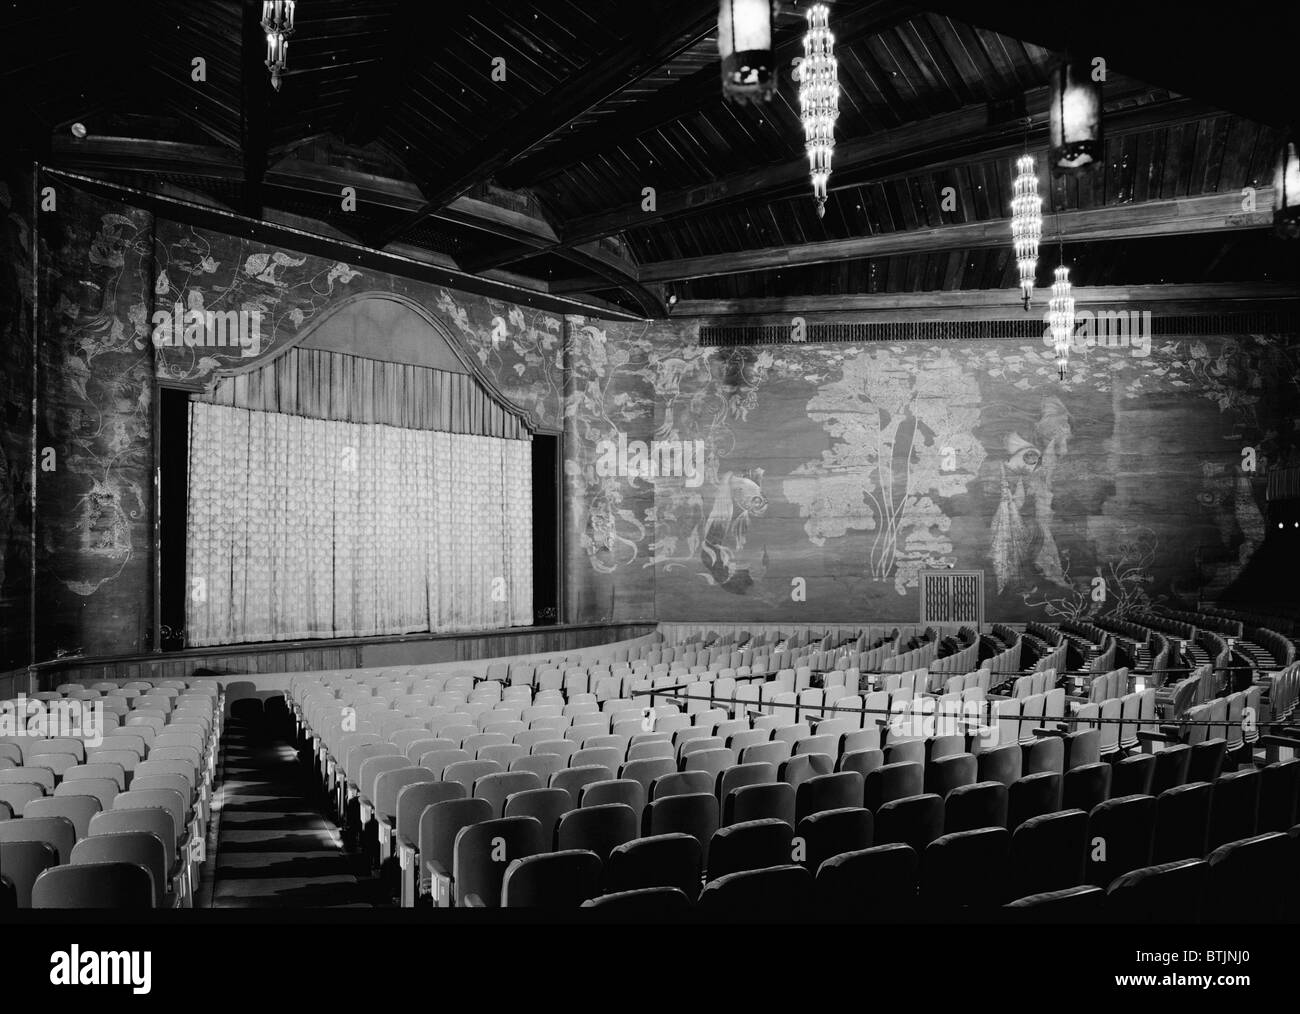 1970s Movie Theater High Resolution Stock Photography And Images - Alamy